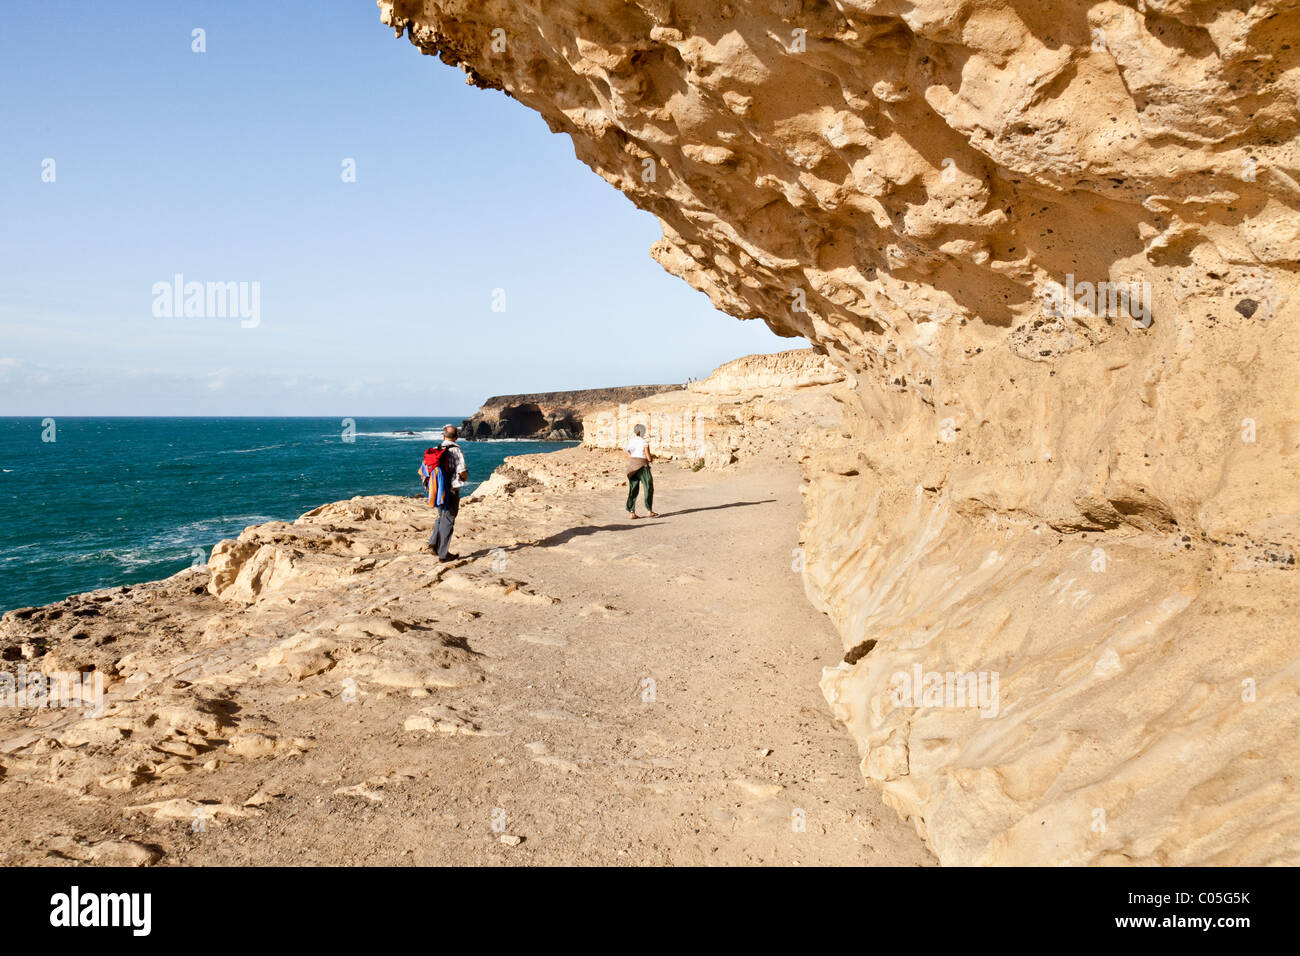 Wave rock formations beside the clifftop footpath near Ajuy on the west coast of the Canary Island of Fuerteventura Stock Photo